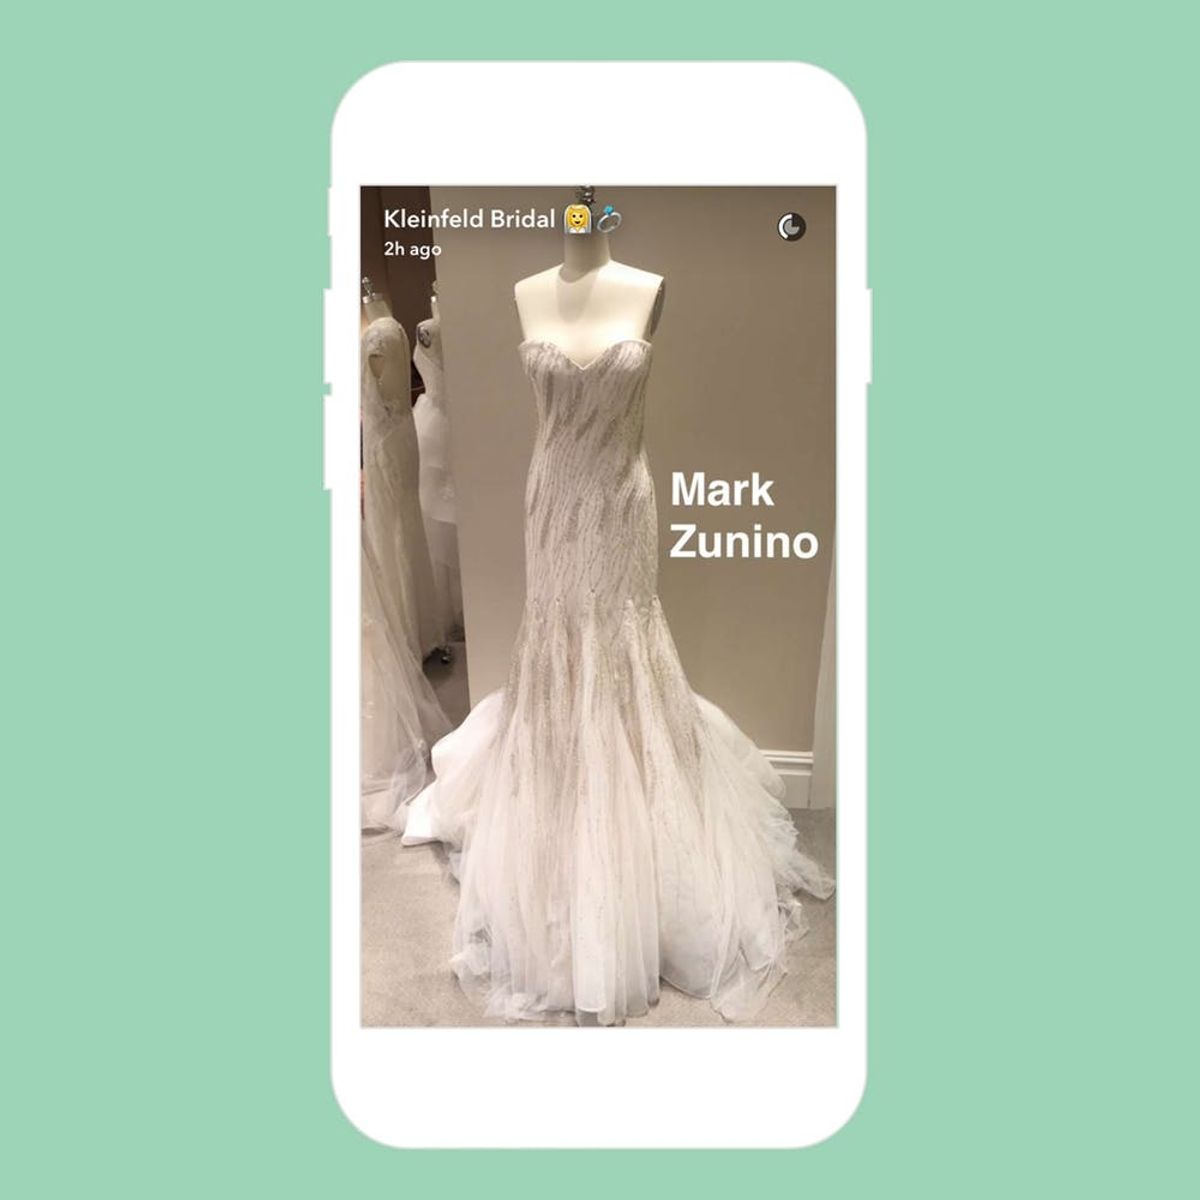 10 Wedding Accounts You *MUST* Follow on Snapchat